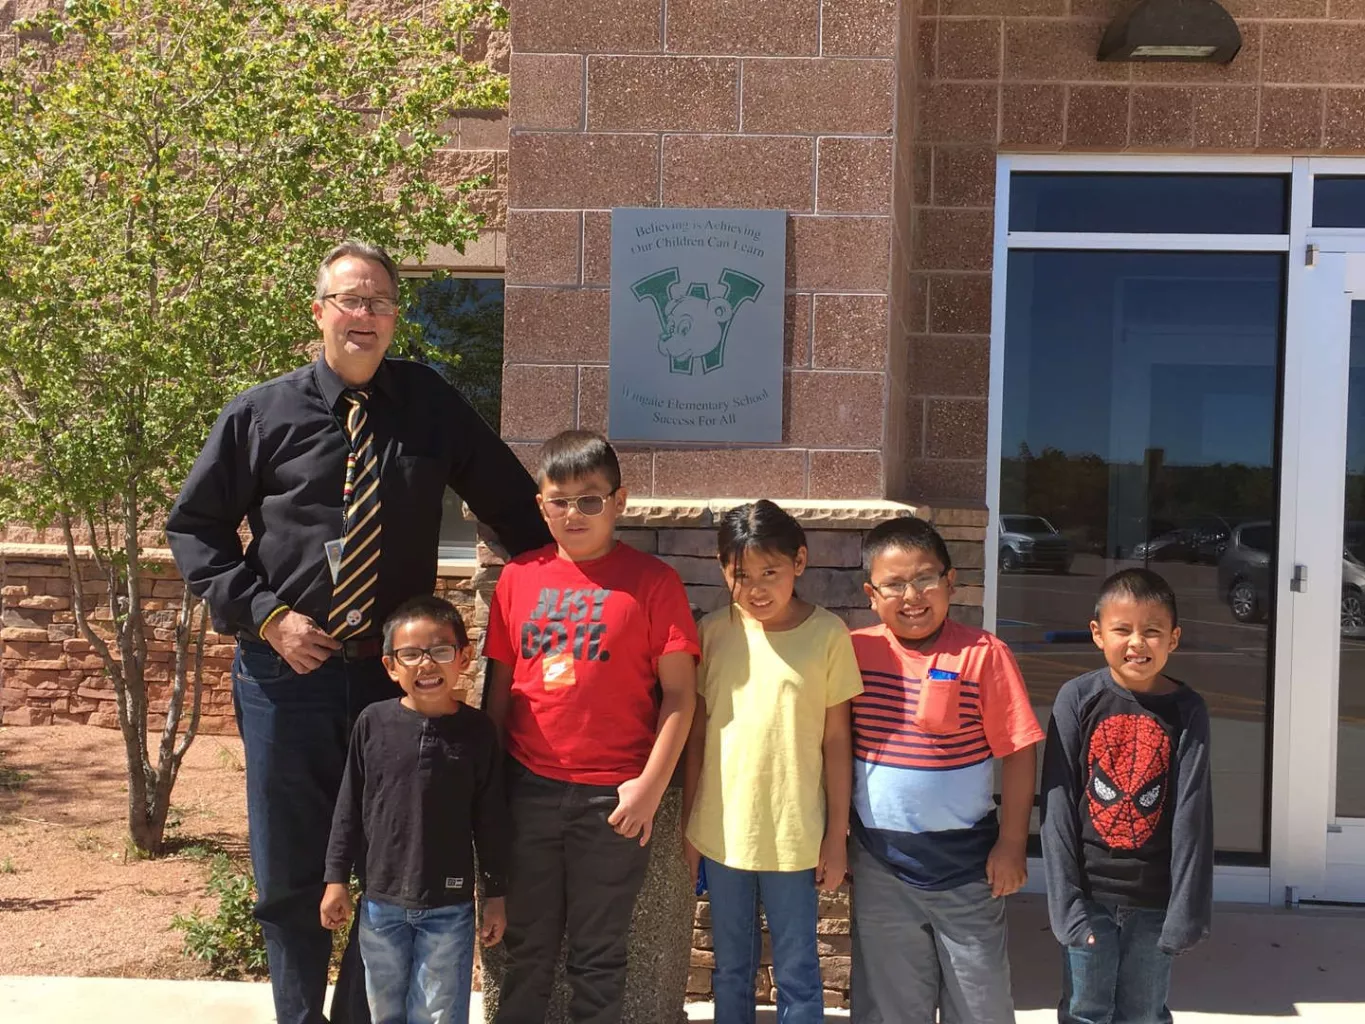 Principal North with students in front of school